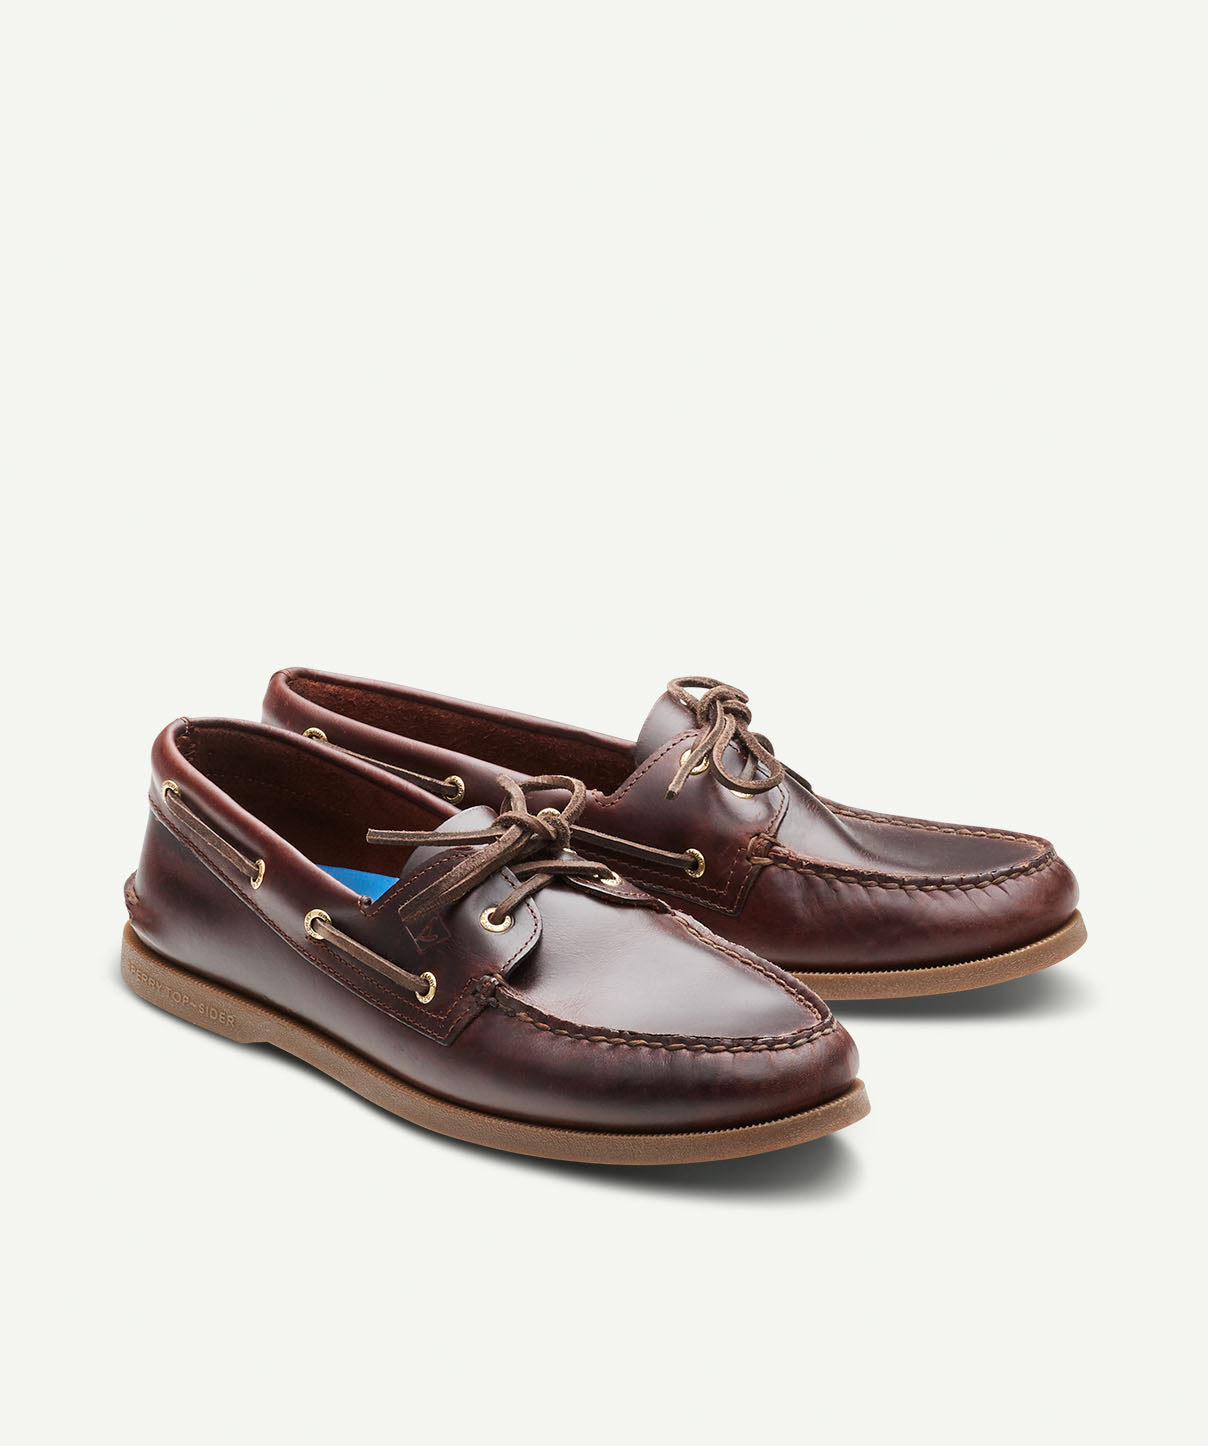 sperry boat shoes top sider